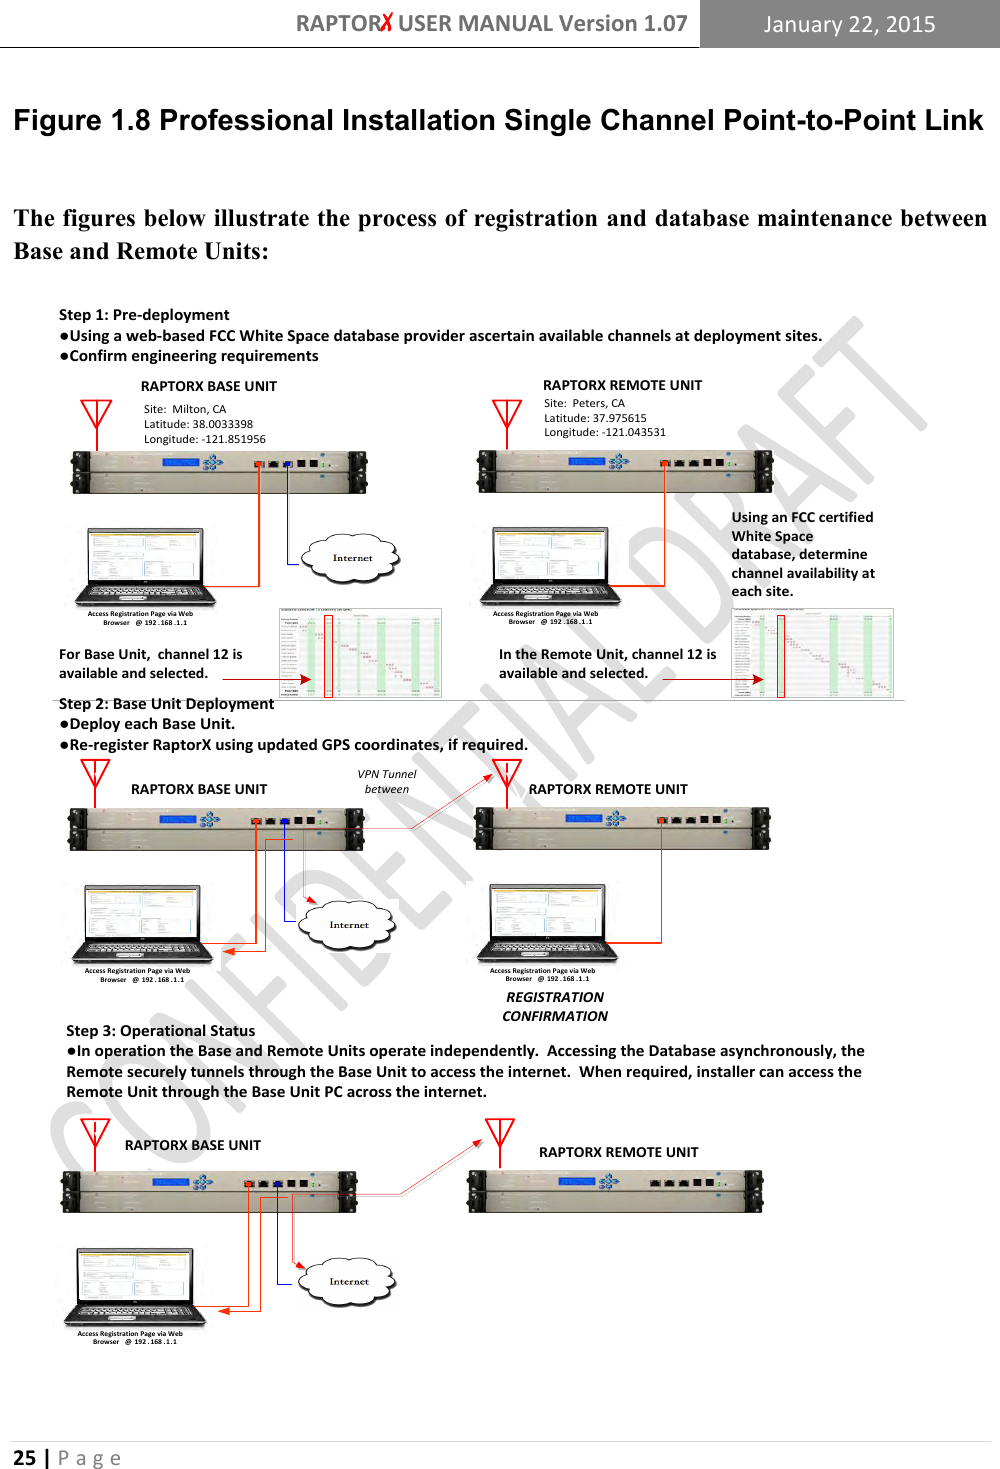 RAPTORX USER MANUAL Version 1.07 January 22, 2015  25 | P a g e   Figure 1.8 Professional Installation Single Channel Point-to-Point Link  The figures below illustrate the process of registration and database maintenance between Base and Remote Units:  Access Registration Page via Web Browser  @  192 . 168 .1.1Access Registration Page via Web Browser  @  192 . 168 .1.1Access Registration Page via Web Browser  @  192 . 168 .1.1Access Registration Page via Web Browser  @  192 . 168 .1.1Access Registration Page via Web Browser  @  192 . 168 .1.1RAPTORX BASE UNIT RAPTORX REMOTE UNITUsing an FCC certified White Space database, determine channel availability at each site.VPN Tunnel betweenRAPTORX BASE UNIT RAPTORX REMOTE UNITRAPTORX BASE UNIT RAPTORX REMOTE UNITREGISTRATION CONFIRMATIONSite:  Peters, CALatitude: 37.975615Longitude: -121.043531Site:  Milton, CALatitude: 38.0033398Longitude: -121.851956Step 1: Pre-deployment●Using a web-based FCC White Space database provider ascertain available channels at deployment sites.●Confirm engineering requirementsStep 2: Base Unit Deployment●Deploy each Base Unit.●Re-register RaptorX using updated GPS coordinates, if required.For Base Unit,  channel 12 is available and selected.In the Remote Unit, channel 12 is available and selected.Step 3: Operational Status●In operation the Base and Remote Units operate independently.  Accessing the Database asynchronously, the Remote securely tunnels through the Base Unit to access the internet.  When required, installer can access the Remote Unit through the Base Unit PC across the internet.     